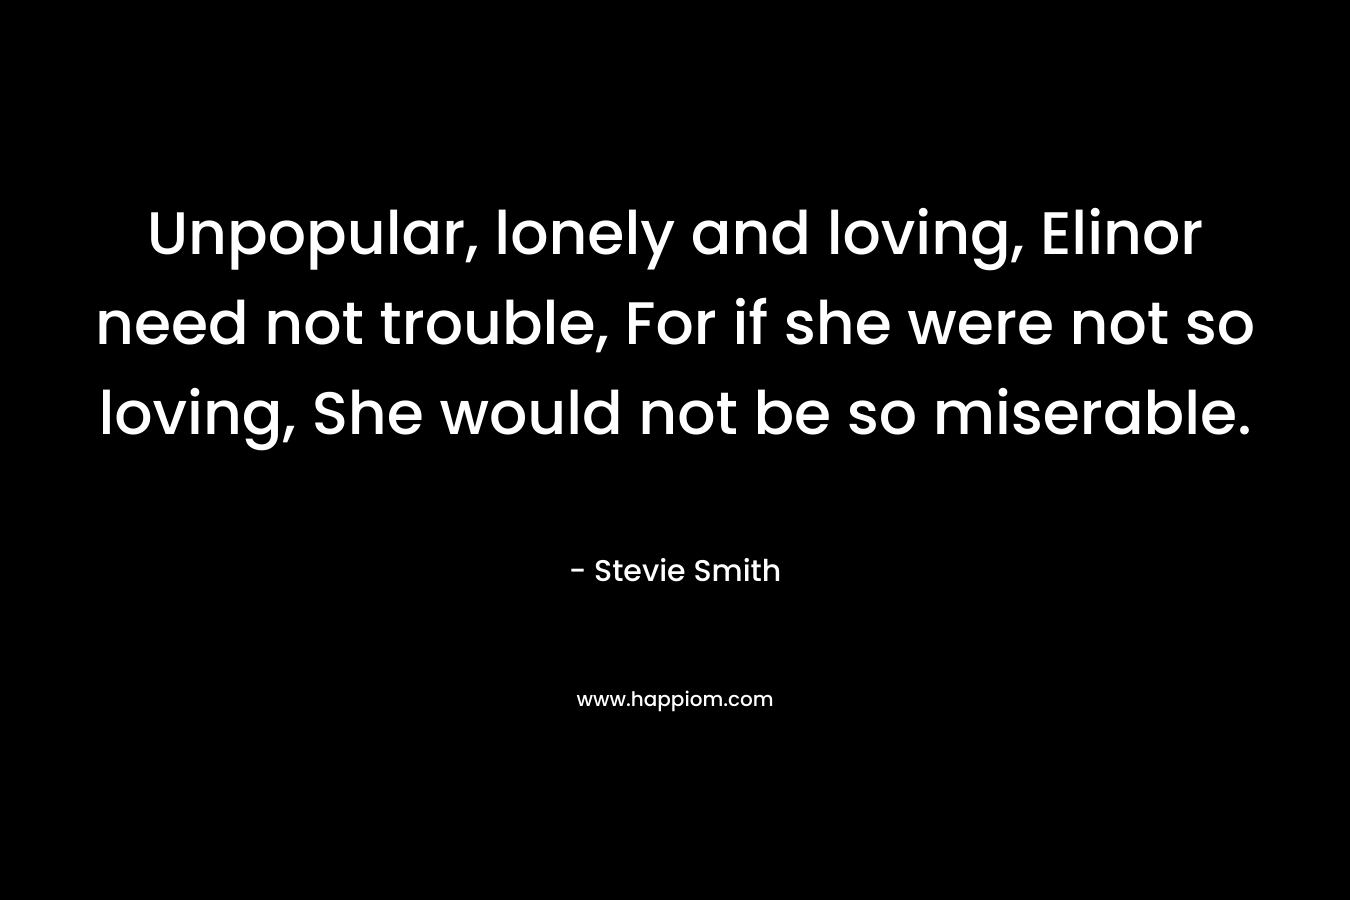 Unpopular, lonely and loving, Elinor need not trouble, For if she were not so loving, She would not be so miserable. – Stevie Smith